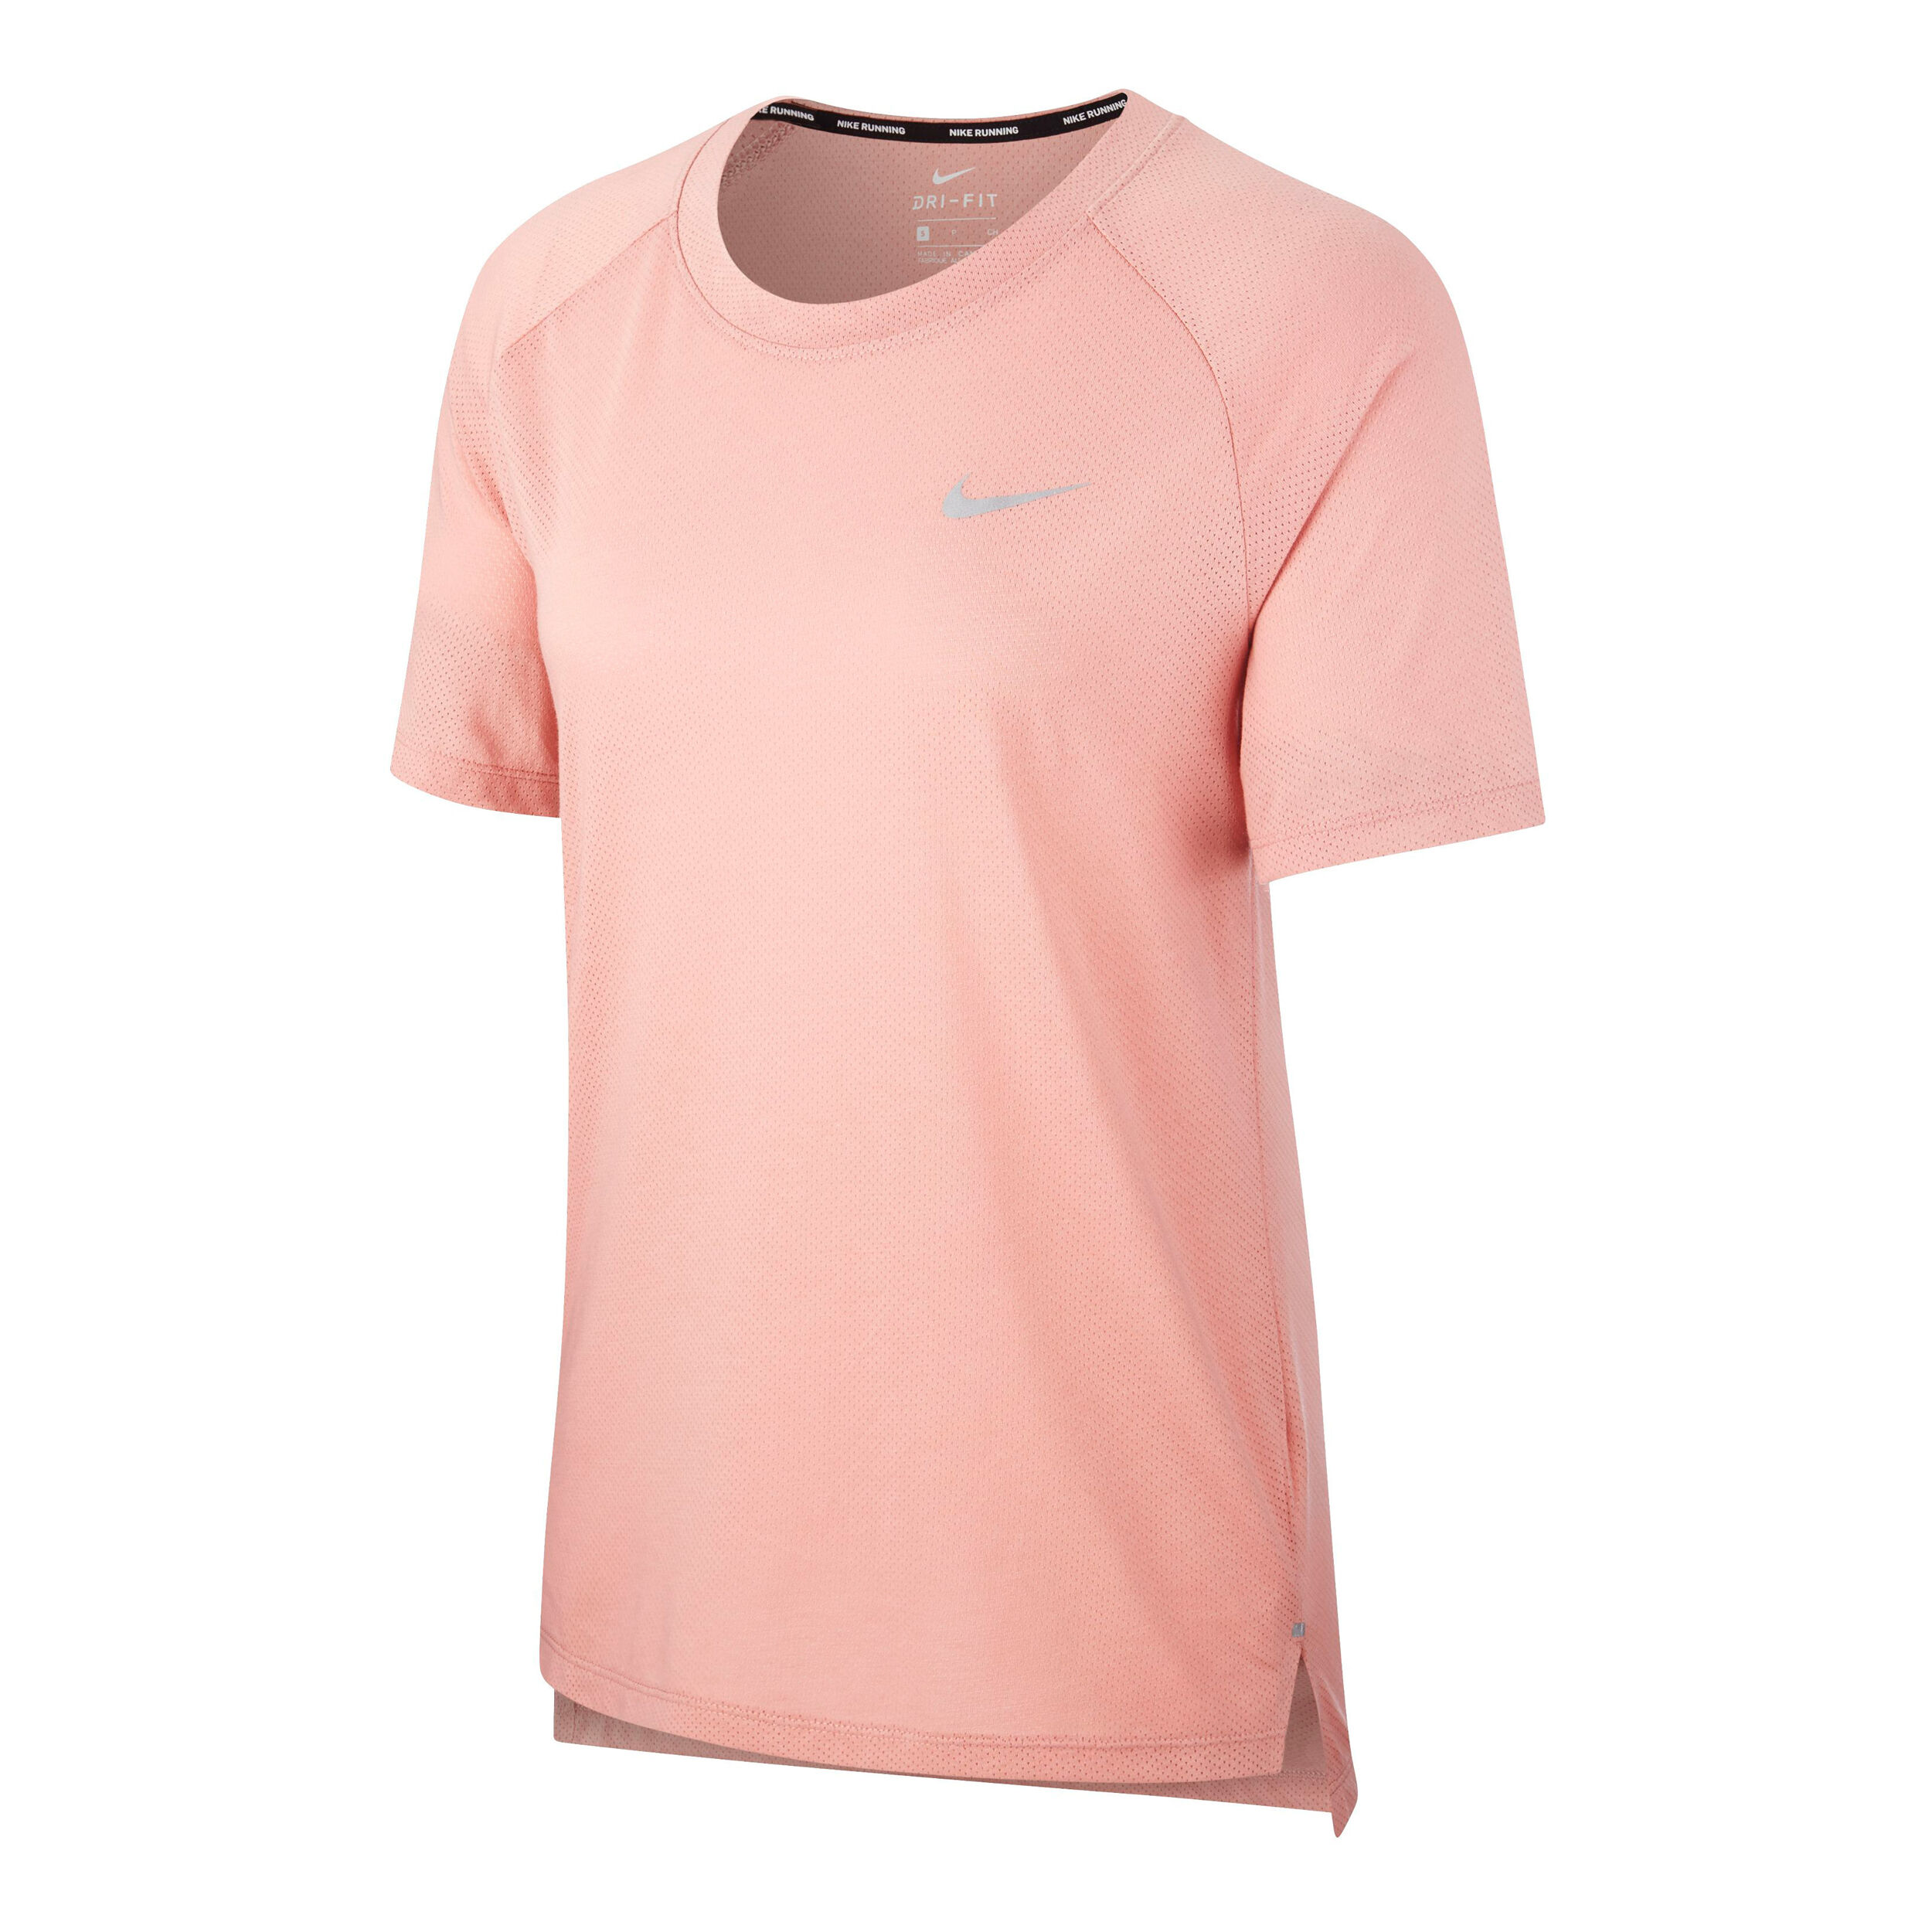 pink nike shirts for women on sale 